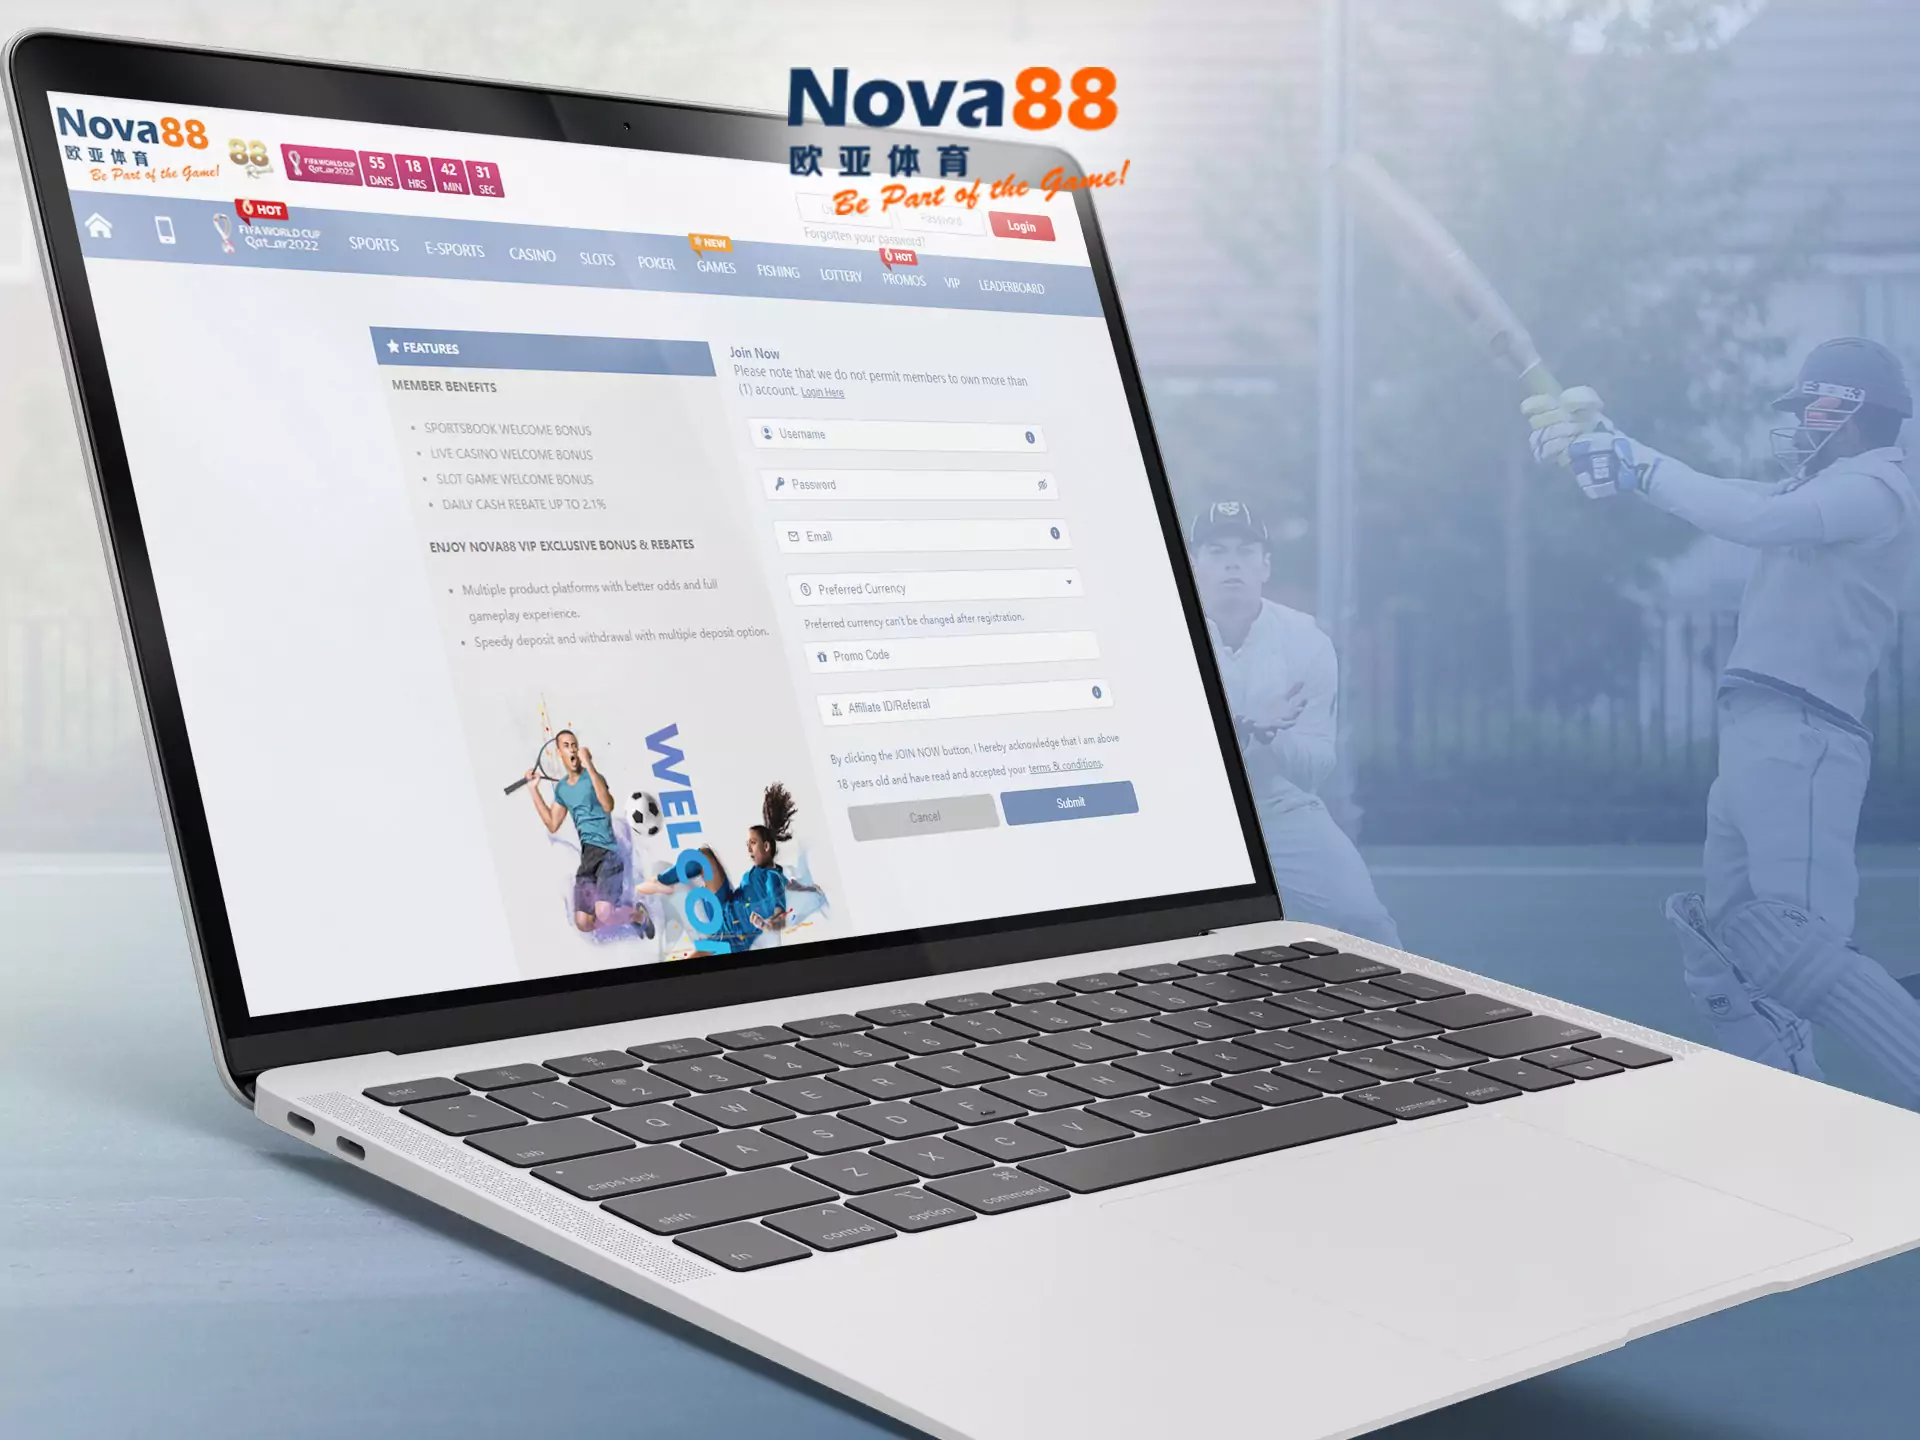 If you are a newcomer at Nova88, create an account and verify it.